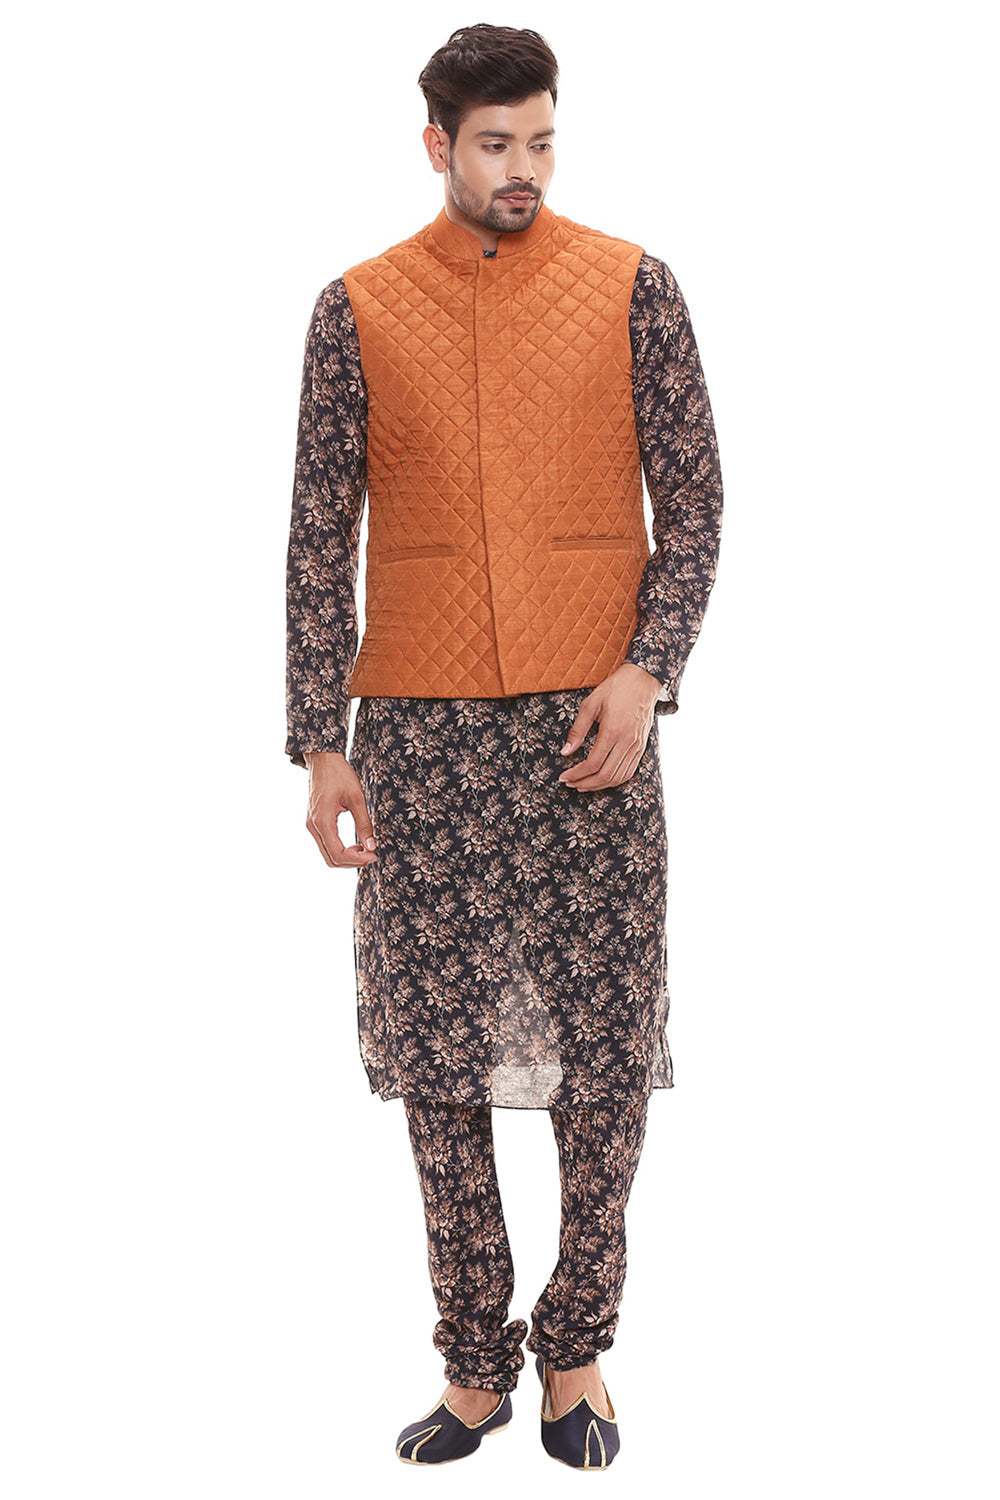 Applique Floral  Kurta Set With Chudidaar And Quilted Sleeveless Jacket